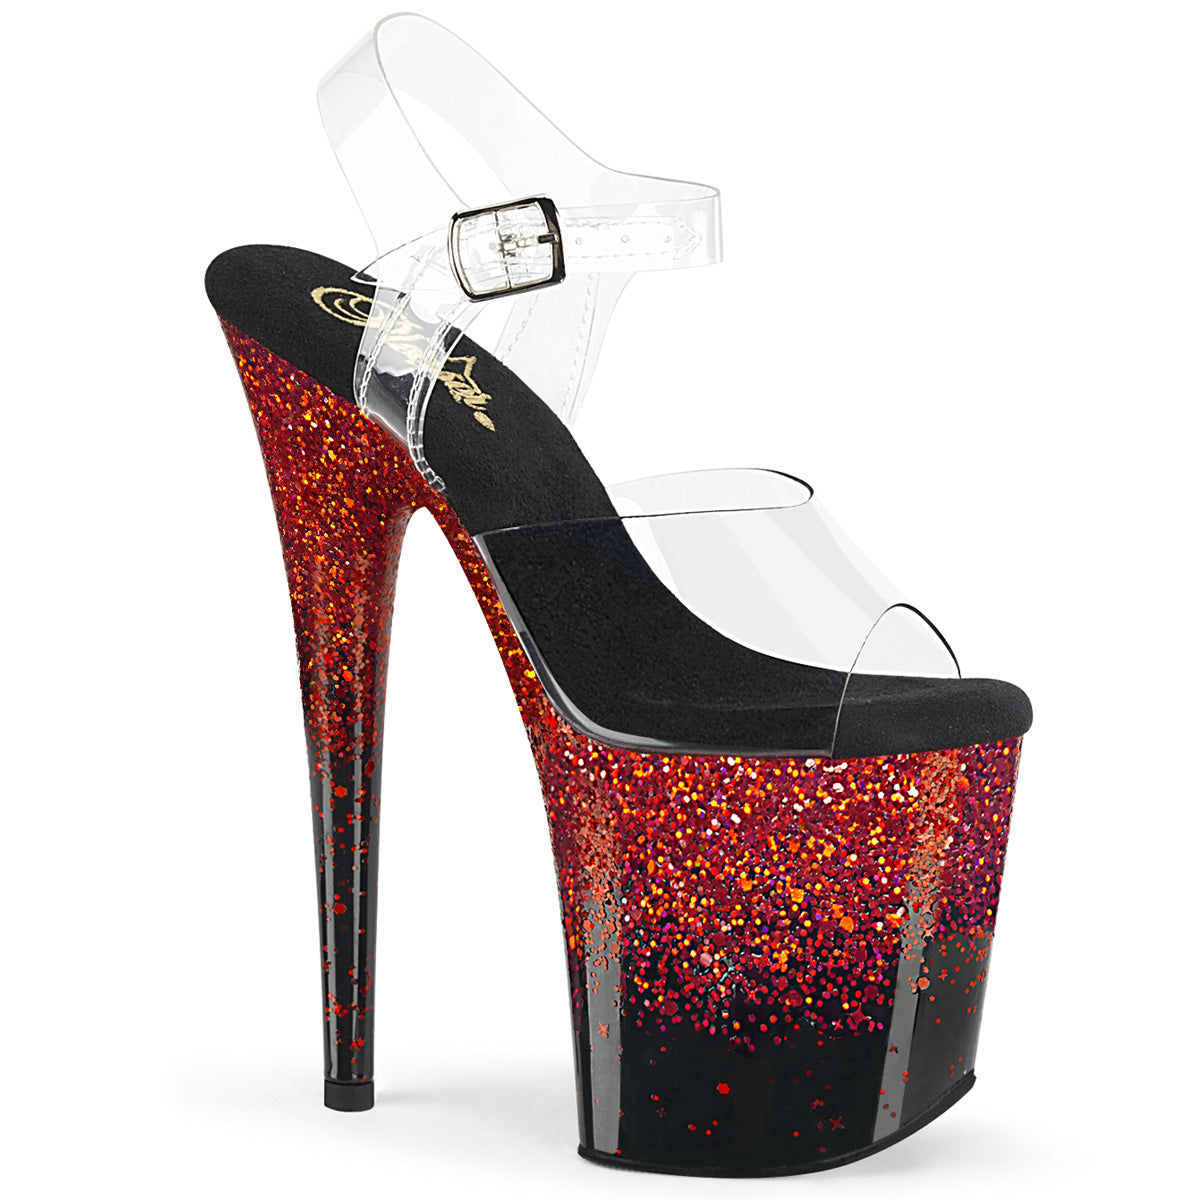 Pleaser FLAMINGO-808SS Clear-Black-Red Multi Glitter 8 Inch (200mm) Heel, 4 Inch (100mm) Platform Ankle Strap Sandal With Holographic Gradient Effect on the Platform Bottom